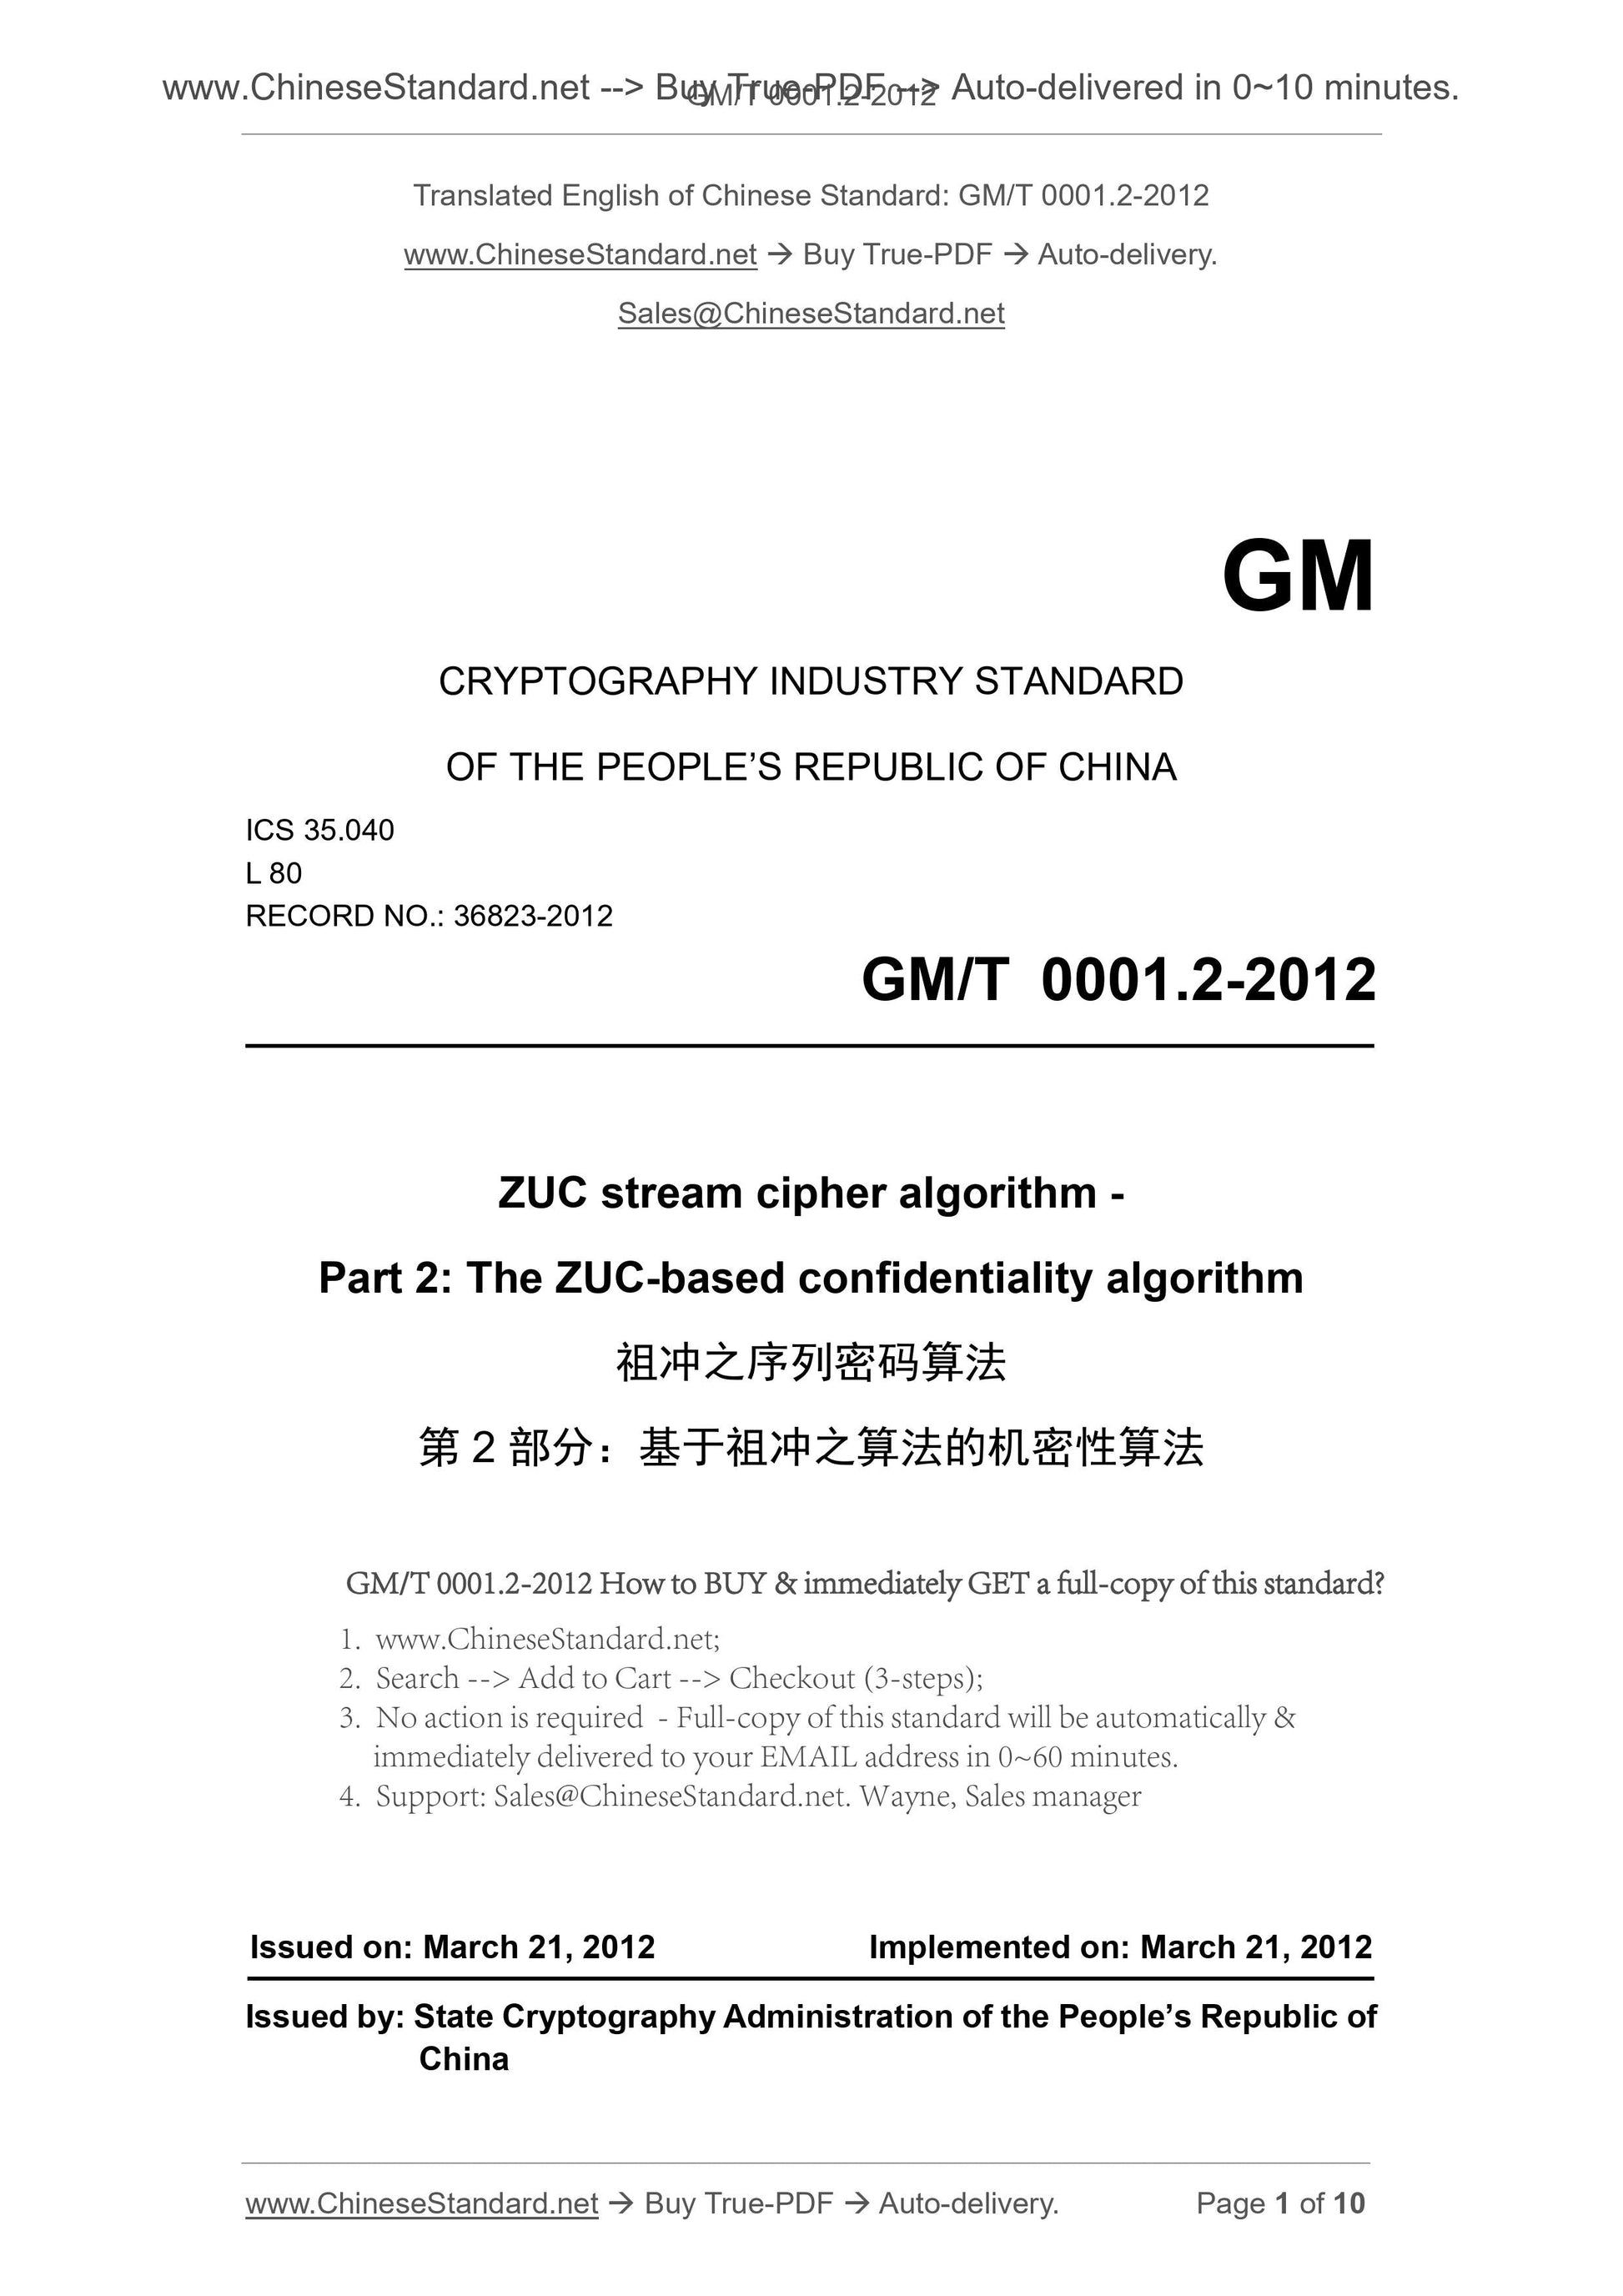 GM/T 0001.2-2012 Page 1